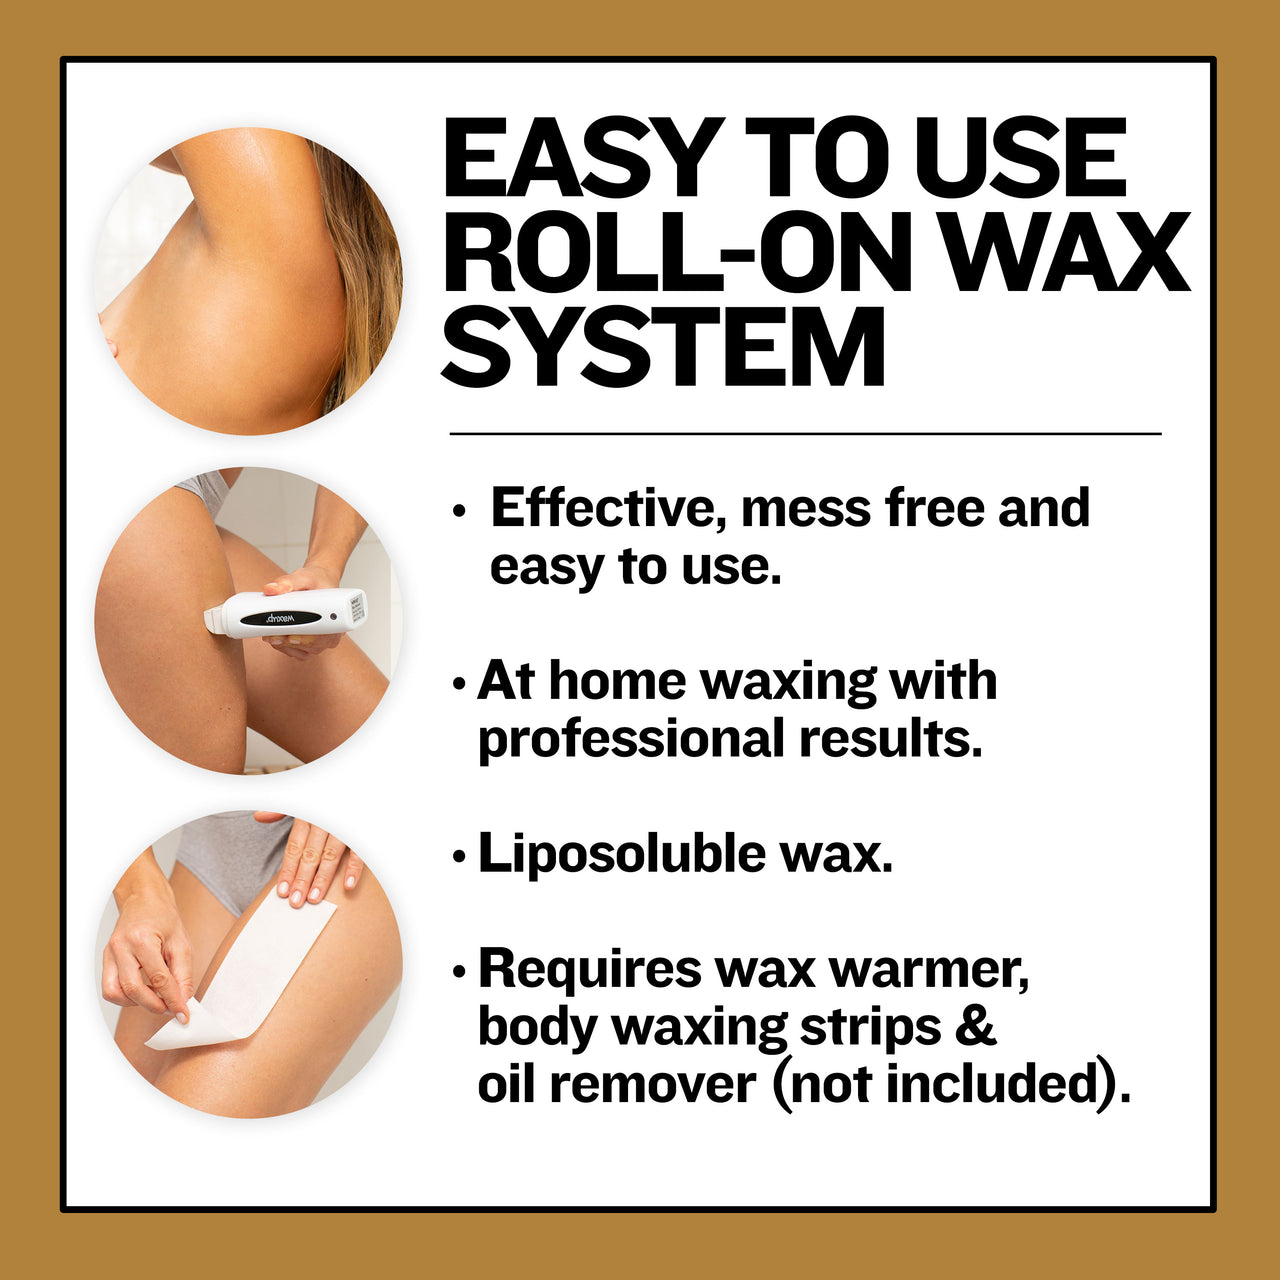 Elite Gold Roll On Wax Cartridges 4 Pack - thatswaxup -  - Roll On Wax - waxup hair removal wax body waxing kit women and men professional waxing supplies